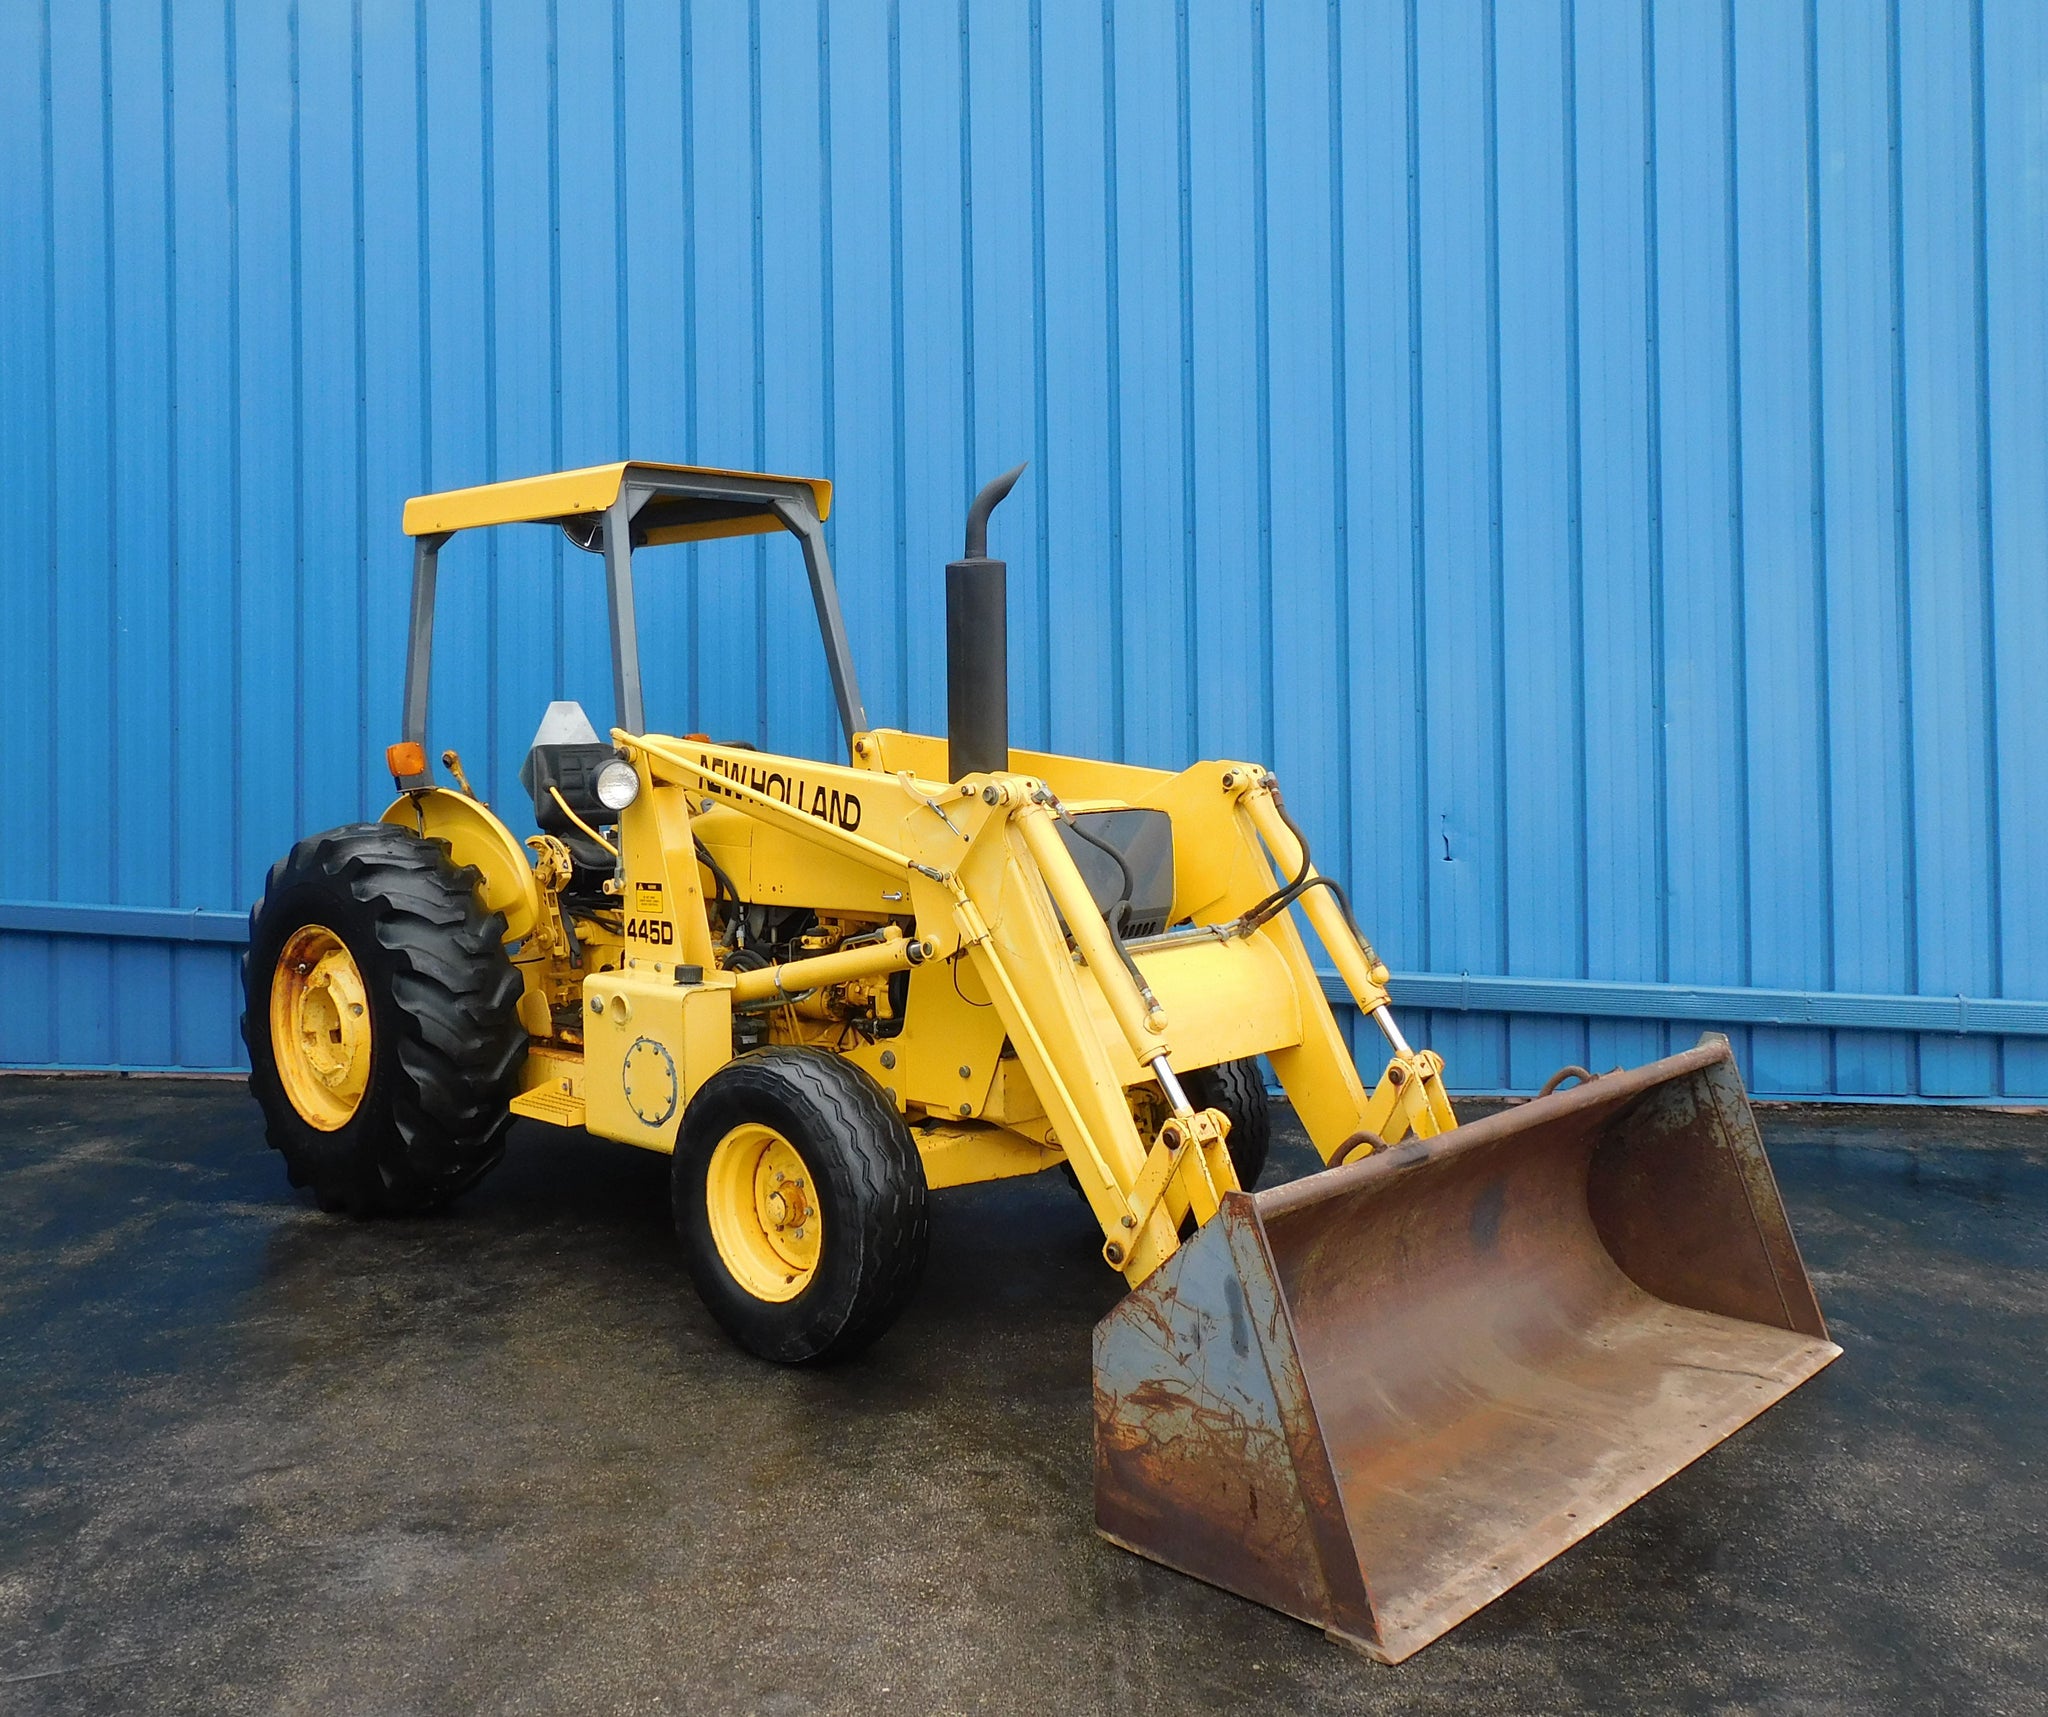 NEW HOLLAND 445D LOADER TRACTOR